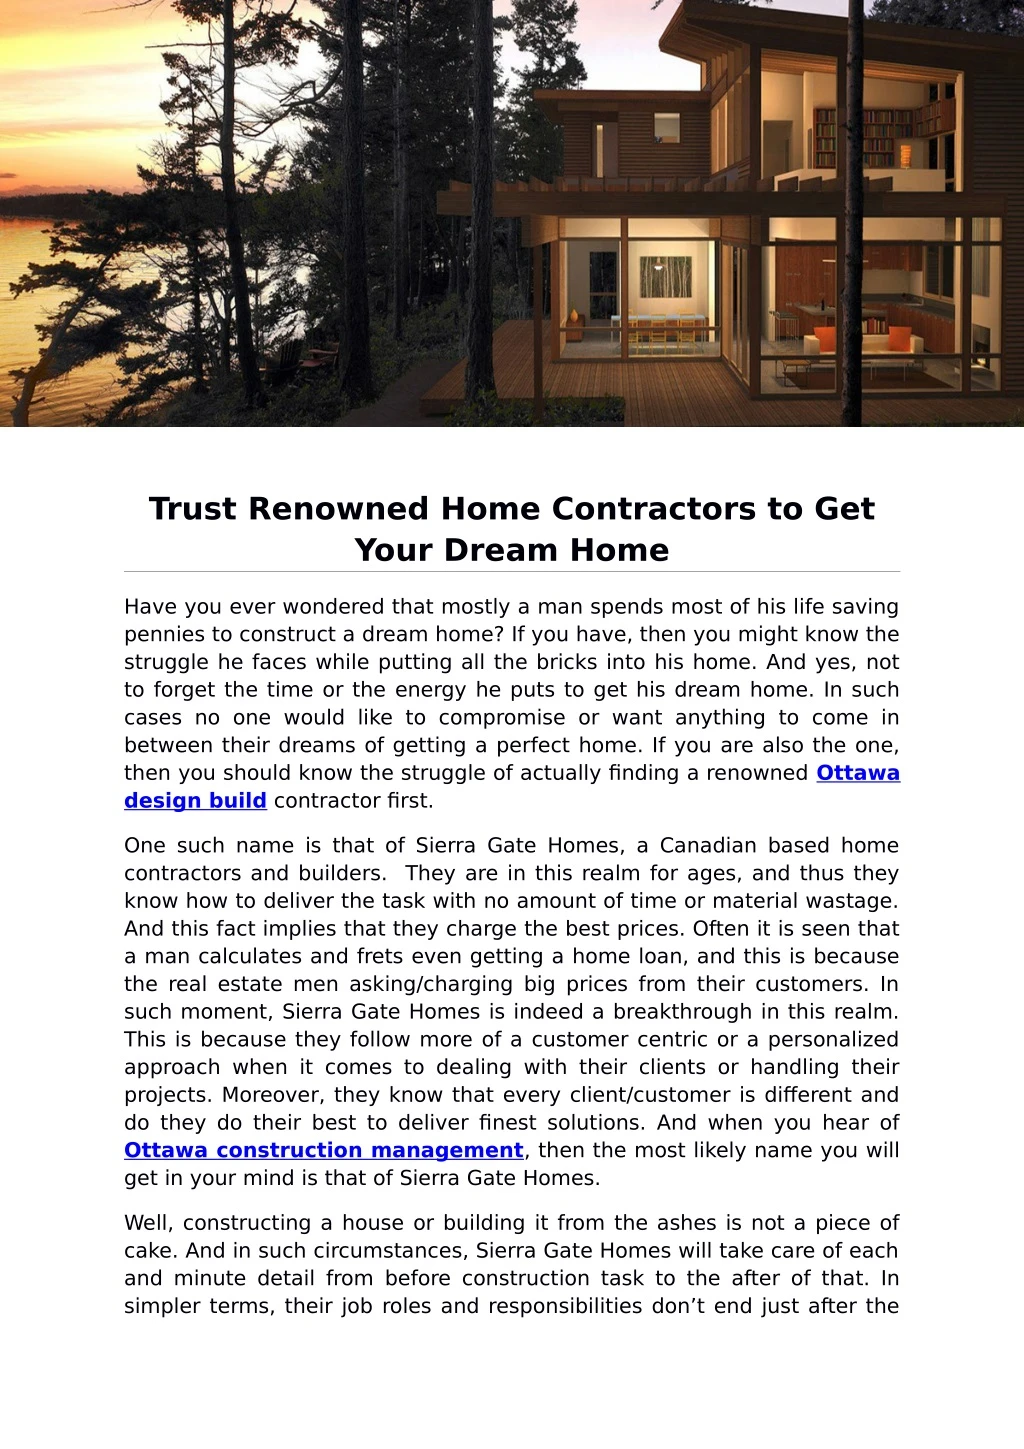 trust renowned home contractors to get your dream